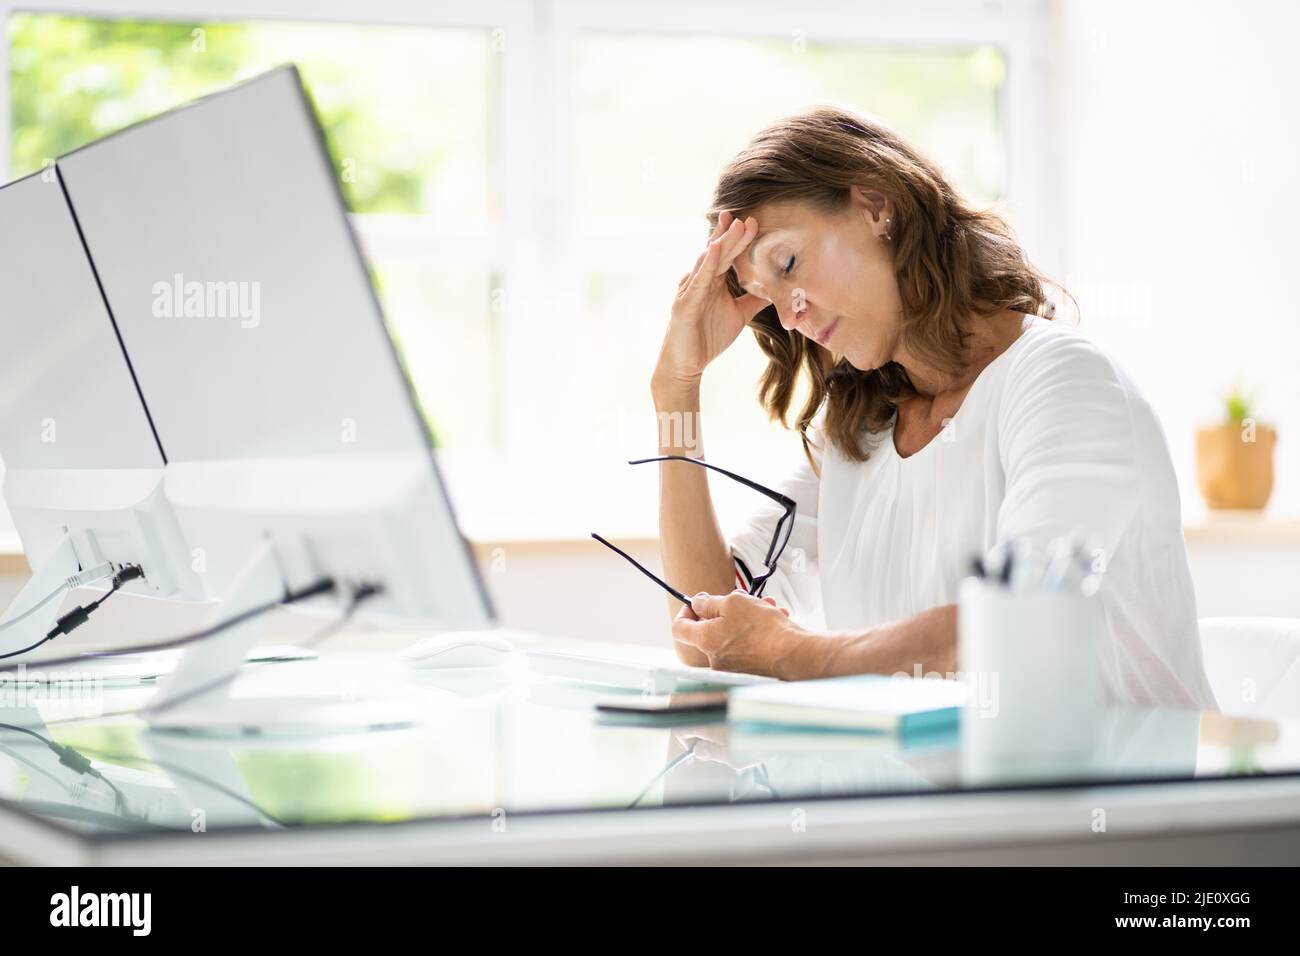 Stressed At Work. Tired Young Office Employee Worker Stock Photo